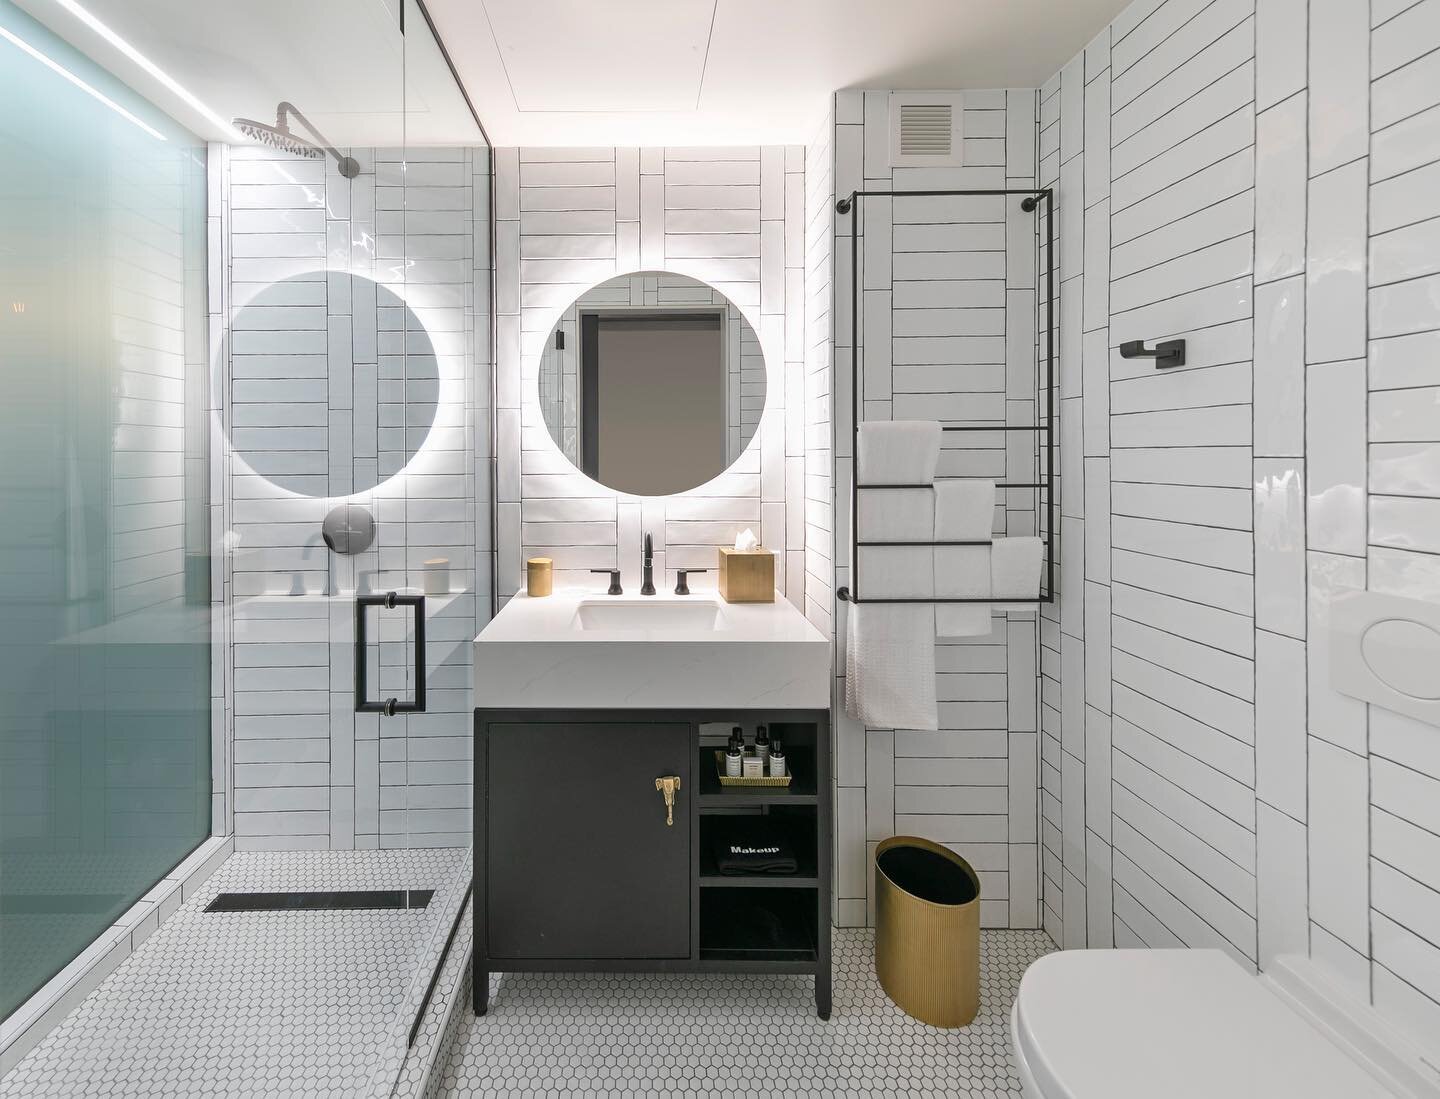 Materiality can impact how one perceives space. At the @WayfarerDTLA the use of translucent glass between the shower and guest room allowed for evenly diffused natural daylight to pour into the bathroom. White tile surfaces help bounce the light off 